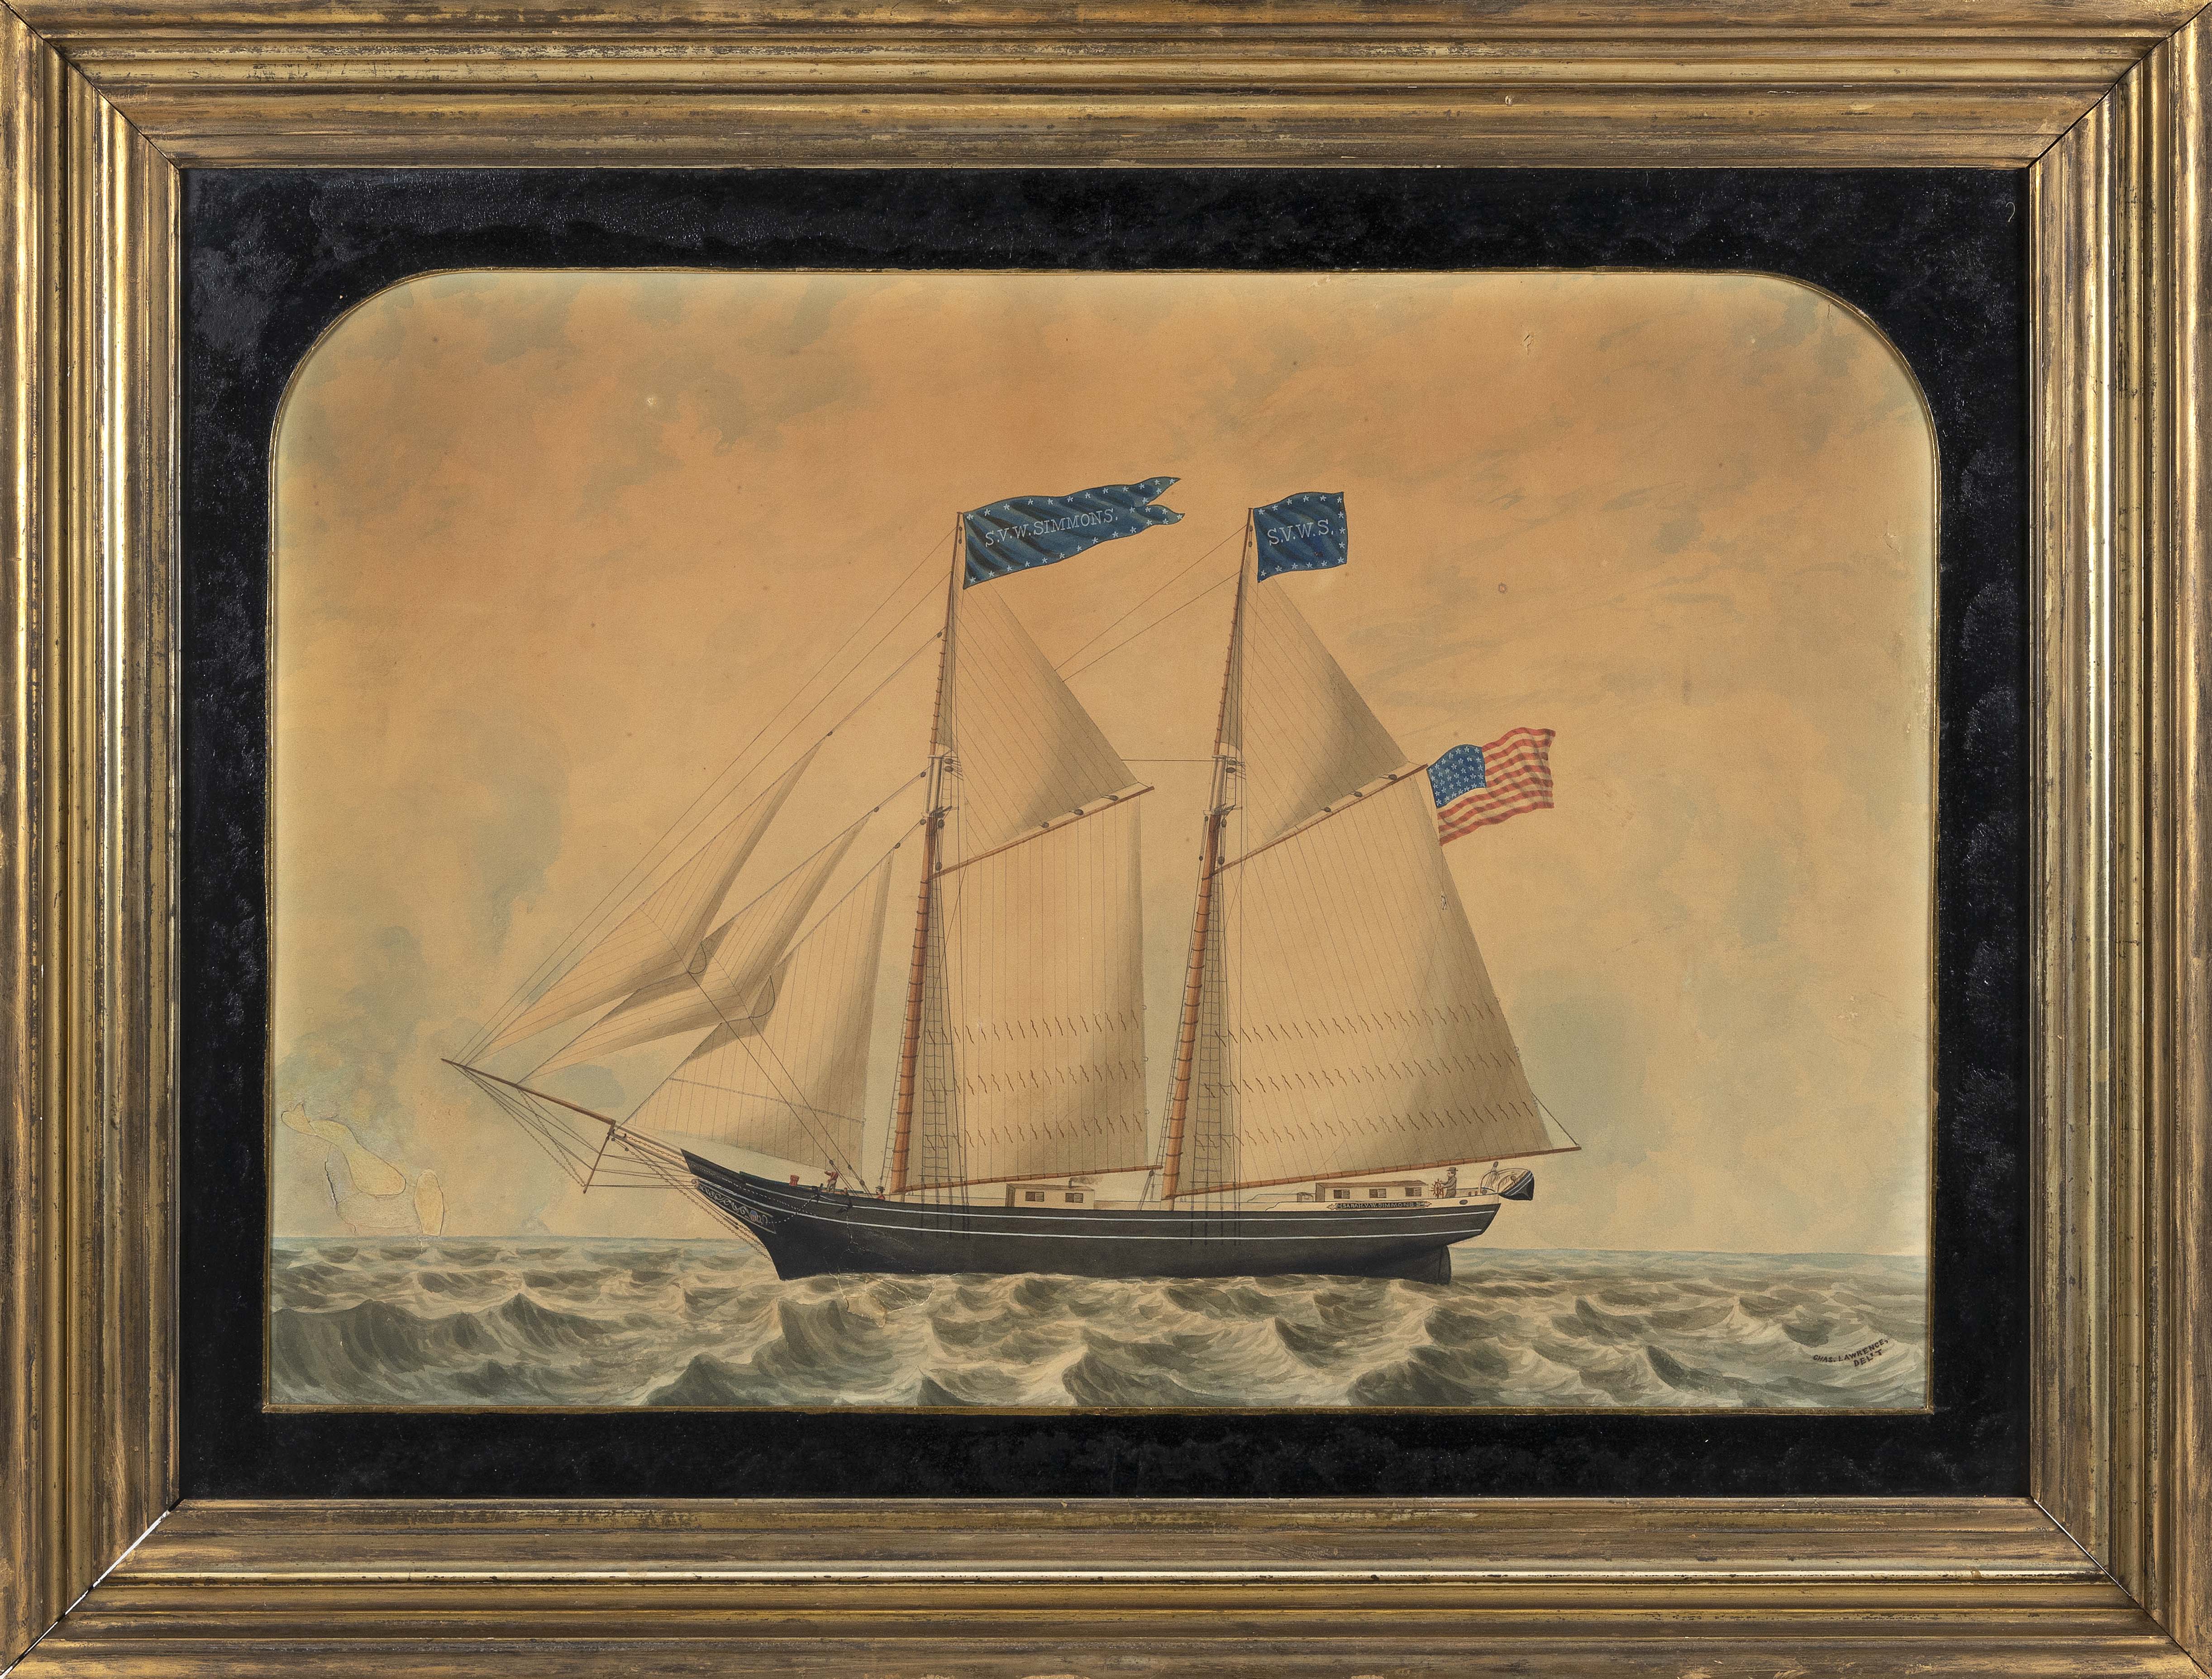 PORTRAIT OF THE TWO-MASTED SCHOONER “S.V.W. SIMMONS” 19th Century Watercolor, 22.25” x 31.5”. Framed 32” x 42”.